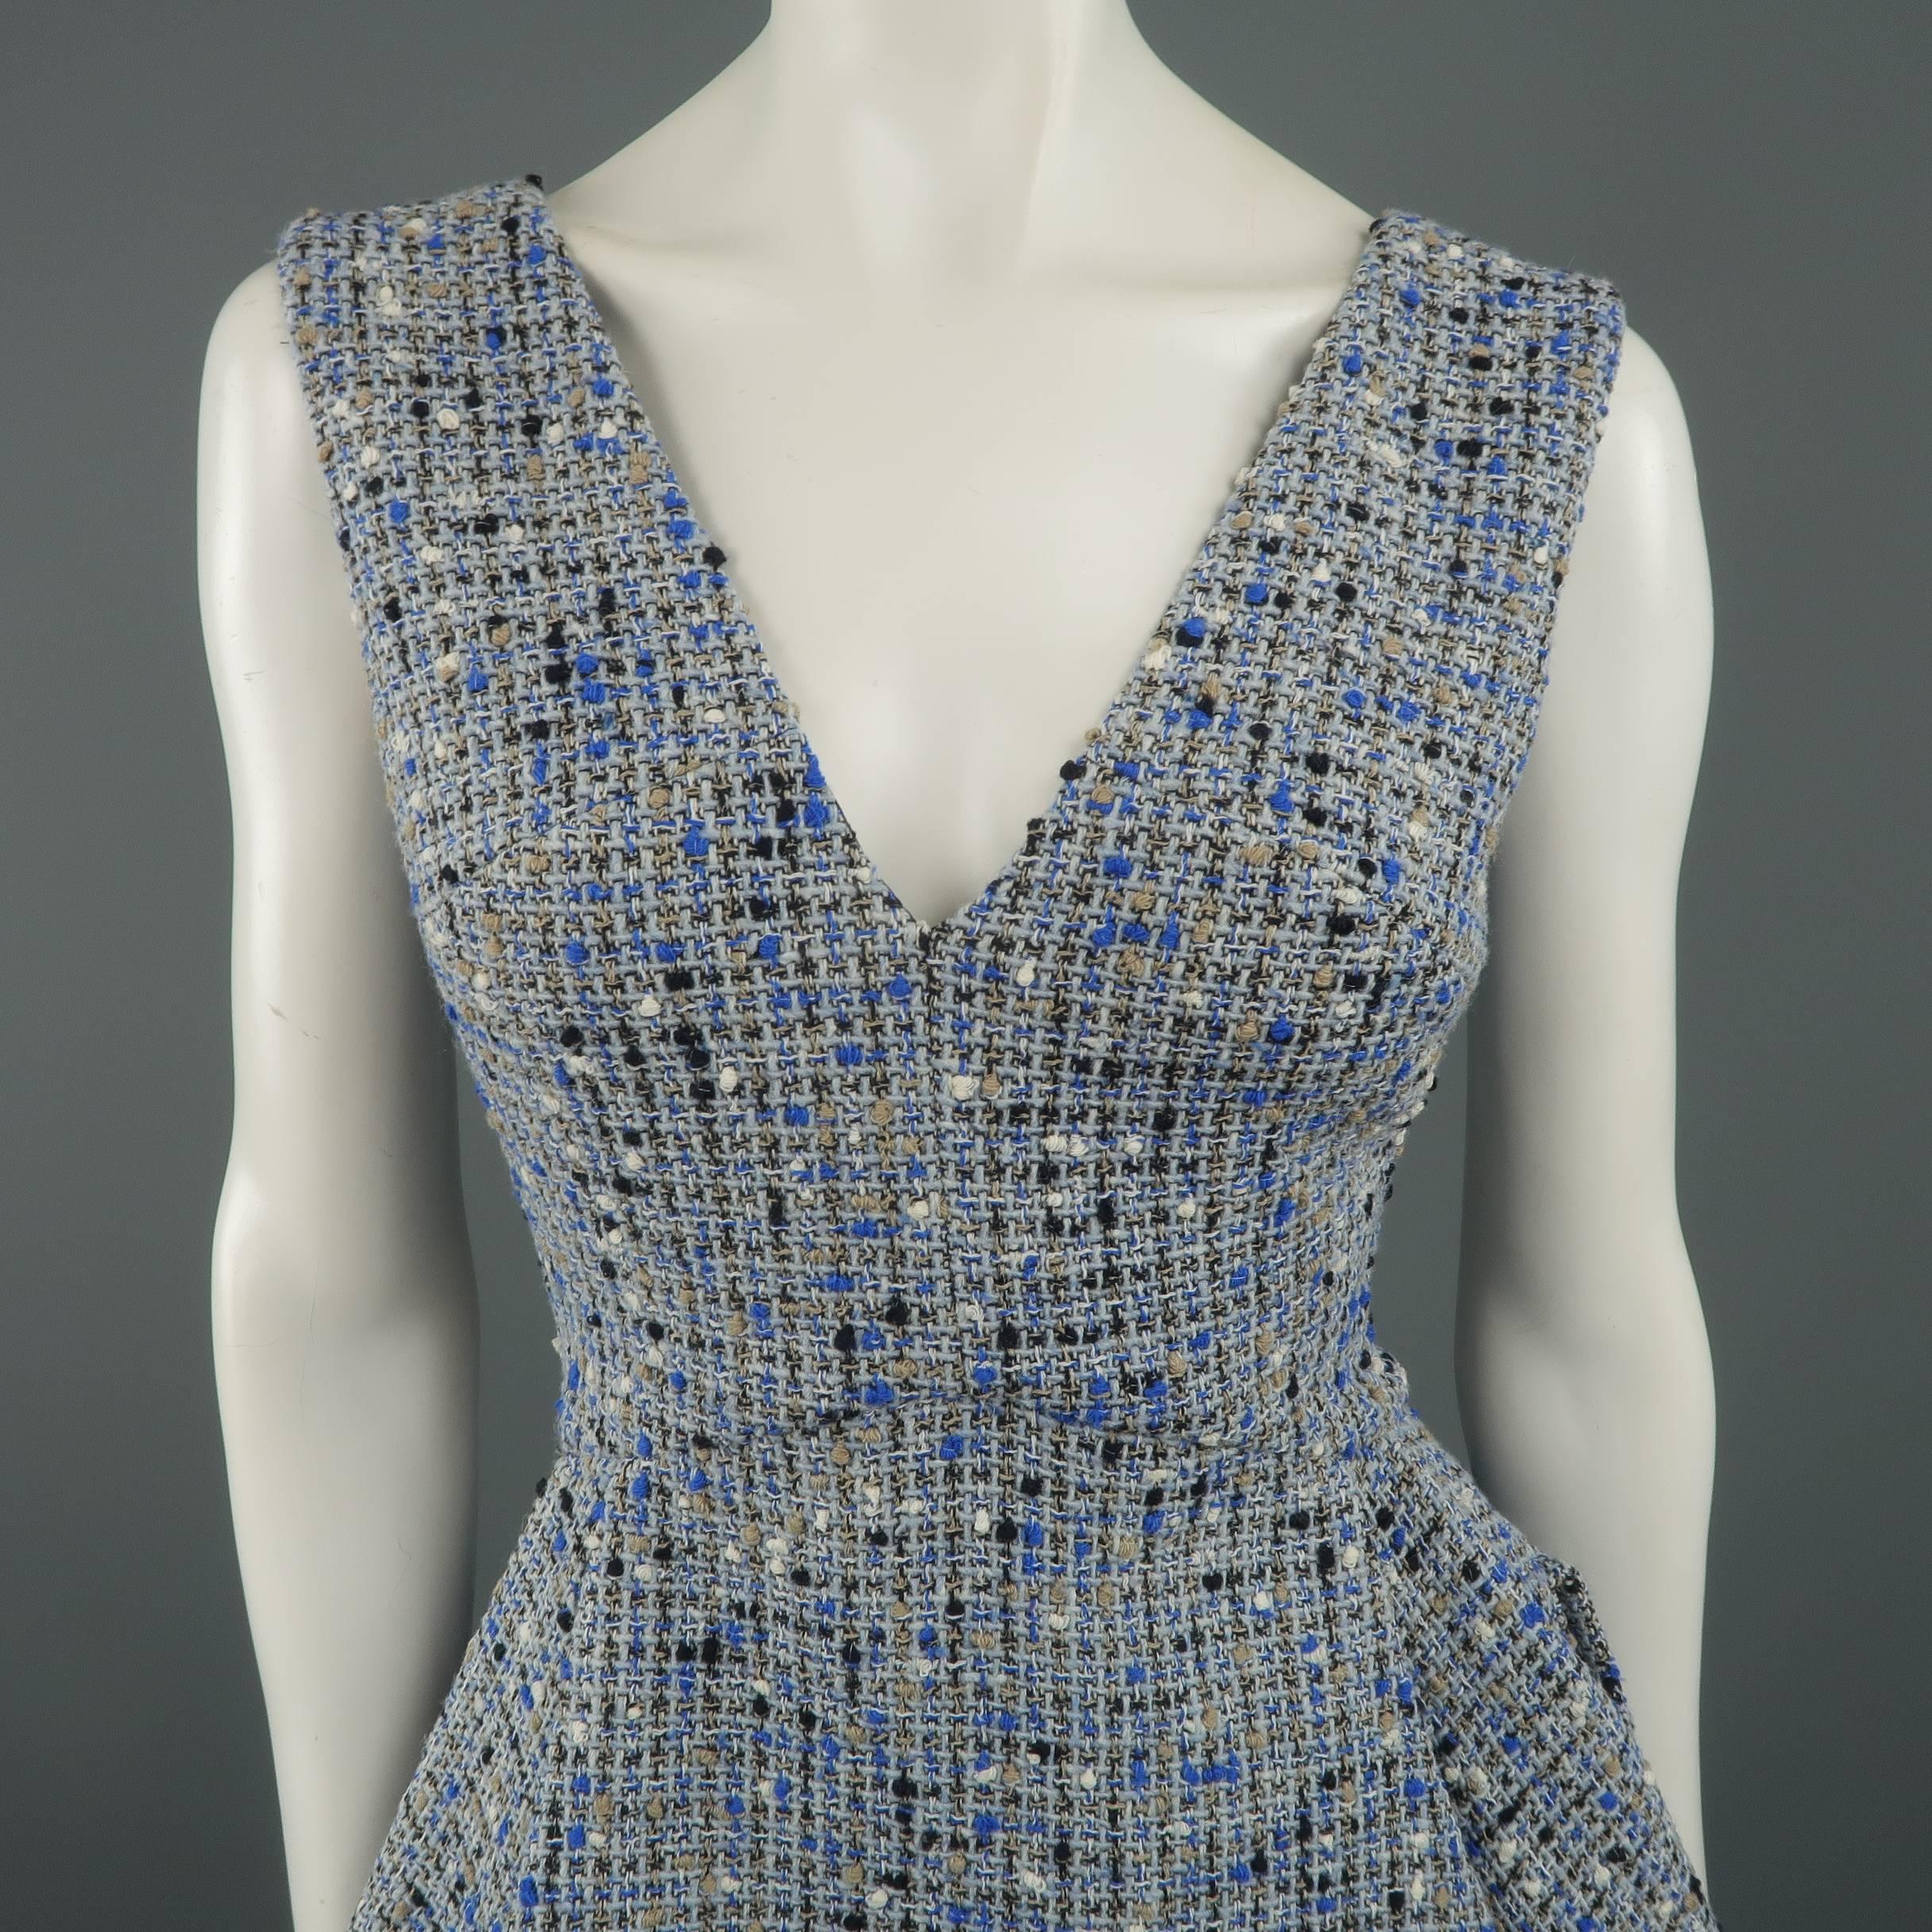 Christian Dior Resort 2016 cocktail dress comes in light blue wool blend tweed with hues of beige and black and features a V neckline, pleated flair A line skirt, and double back pockets. Made in France.
 
Excellent Pre-Owned Condition.
Marked: 6
